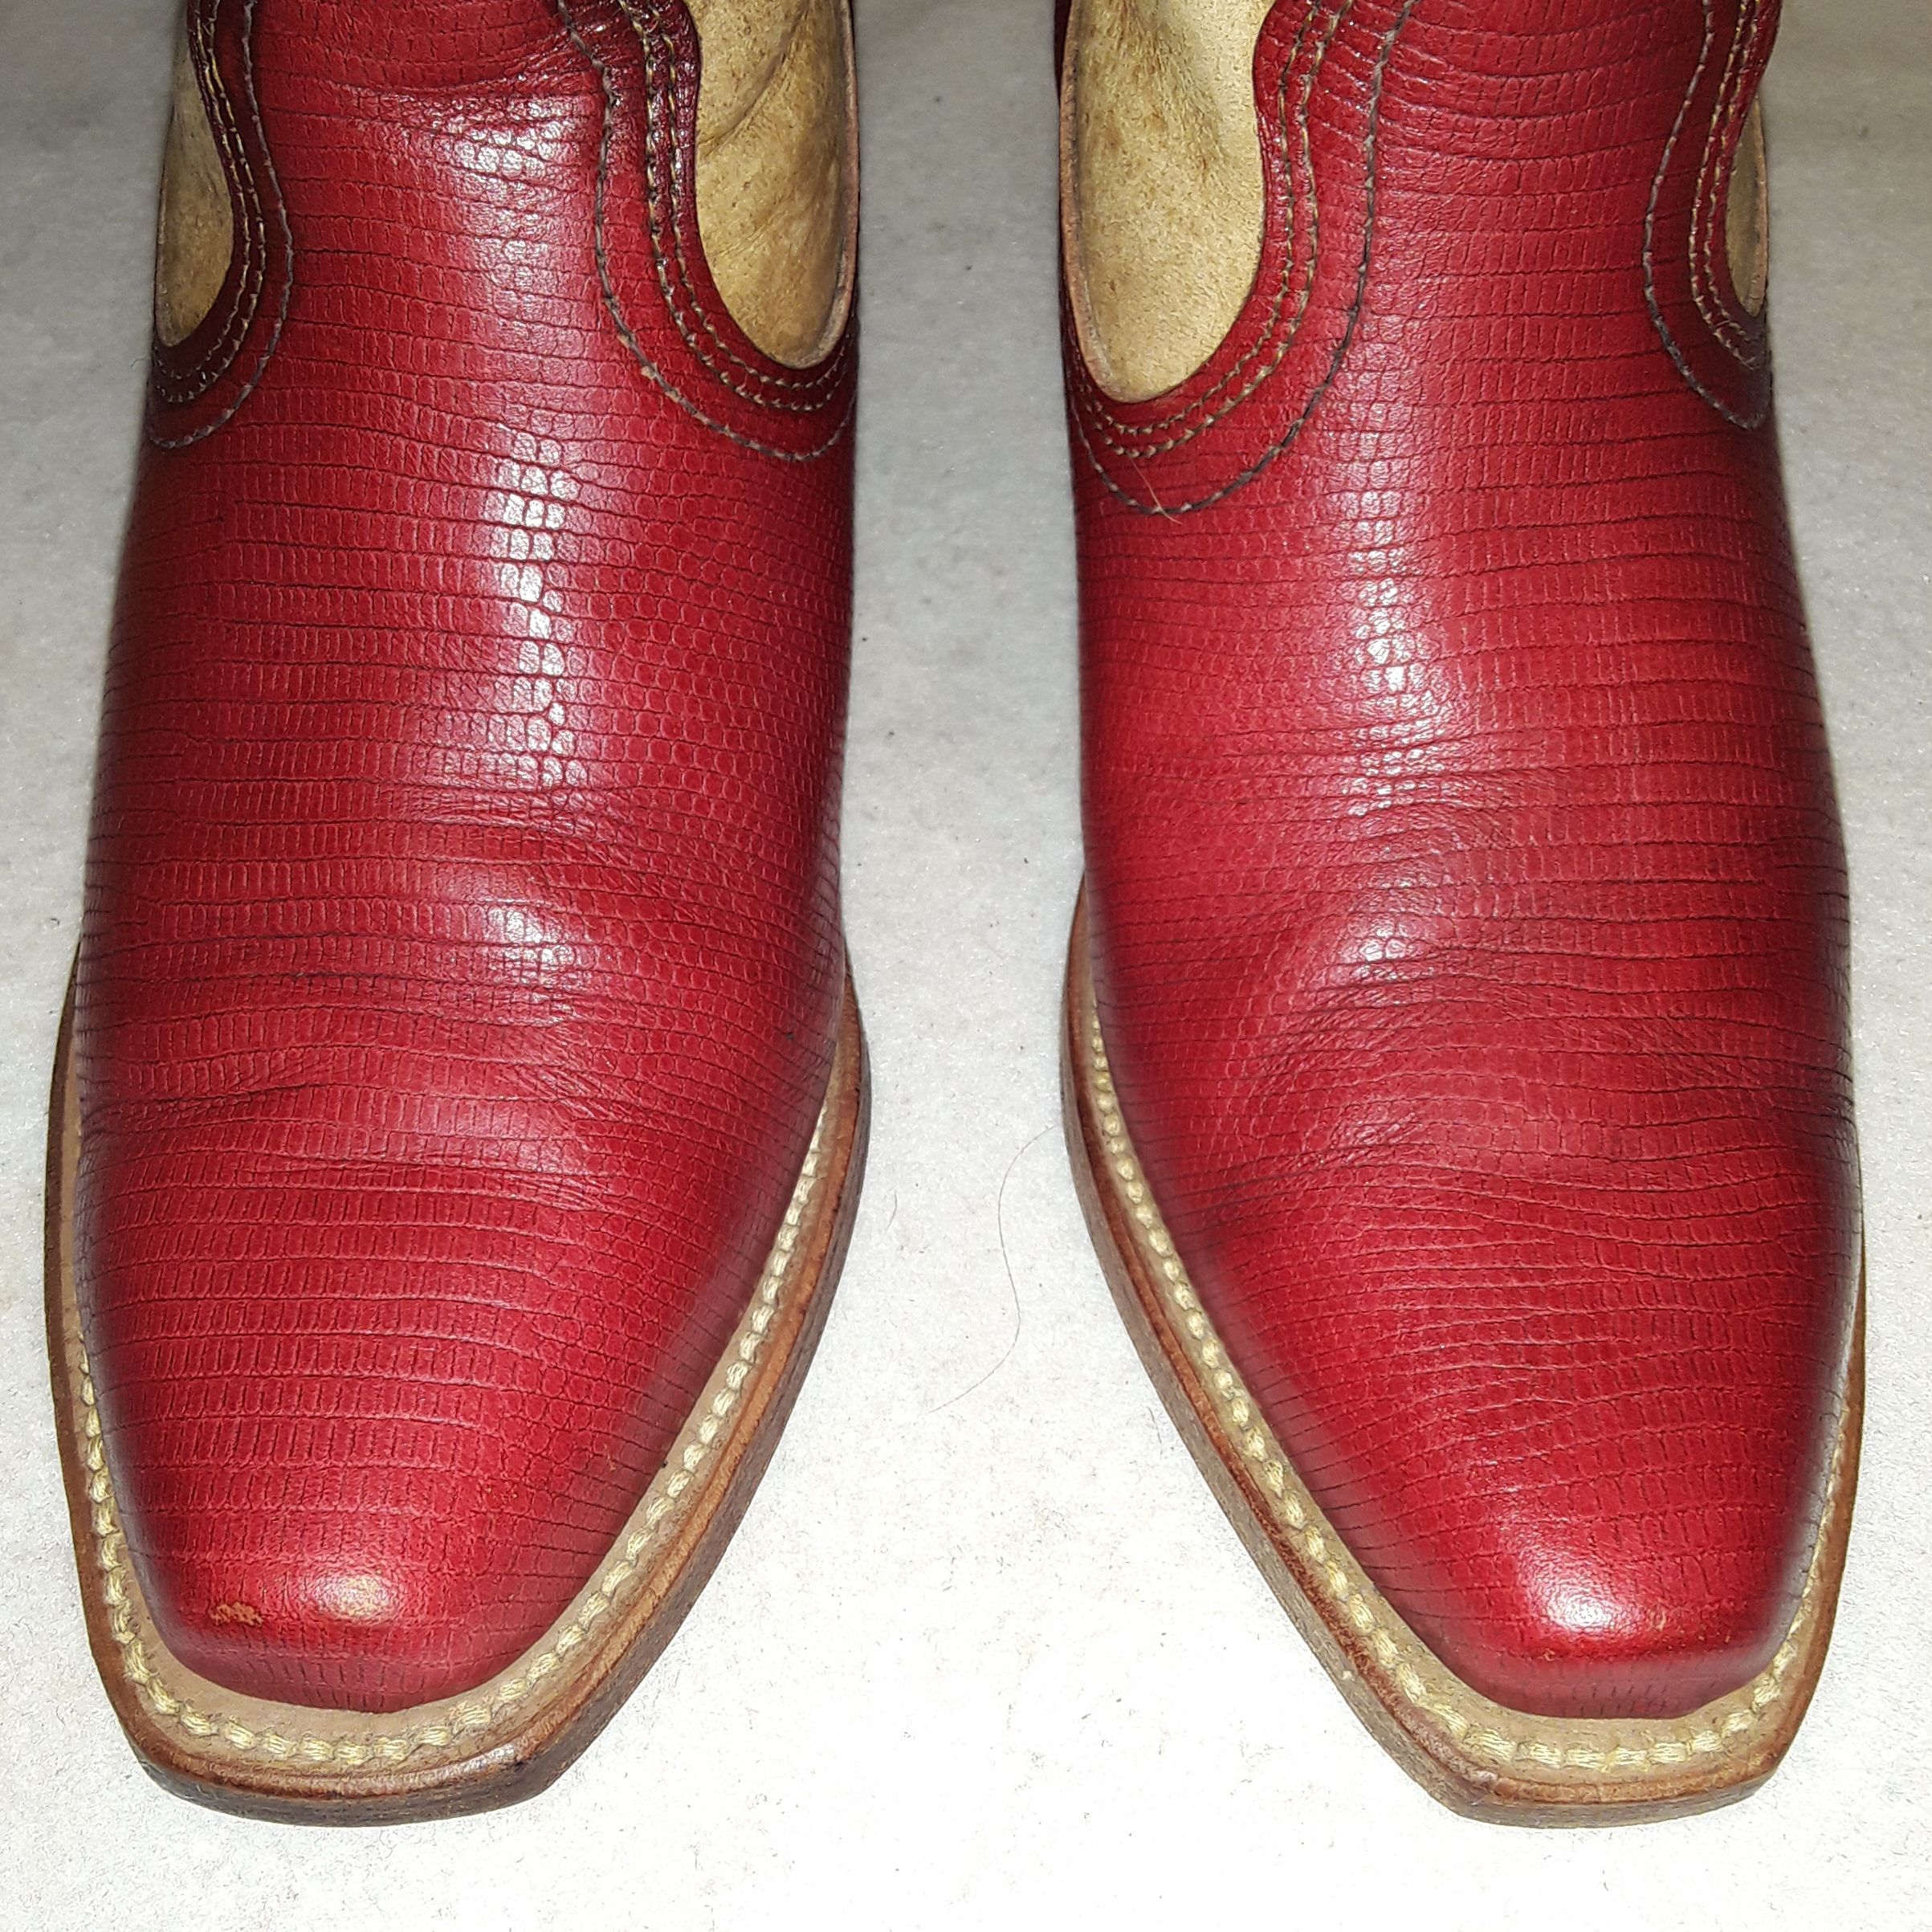 Vintage Vtg Frye Leather Cowgirl Western Boots Size 5.5 B USA Made Size US 5.5 / IT 35.5 - 3 Thumbnail